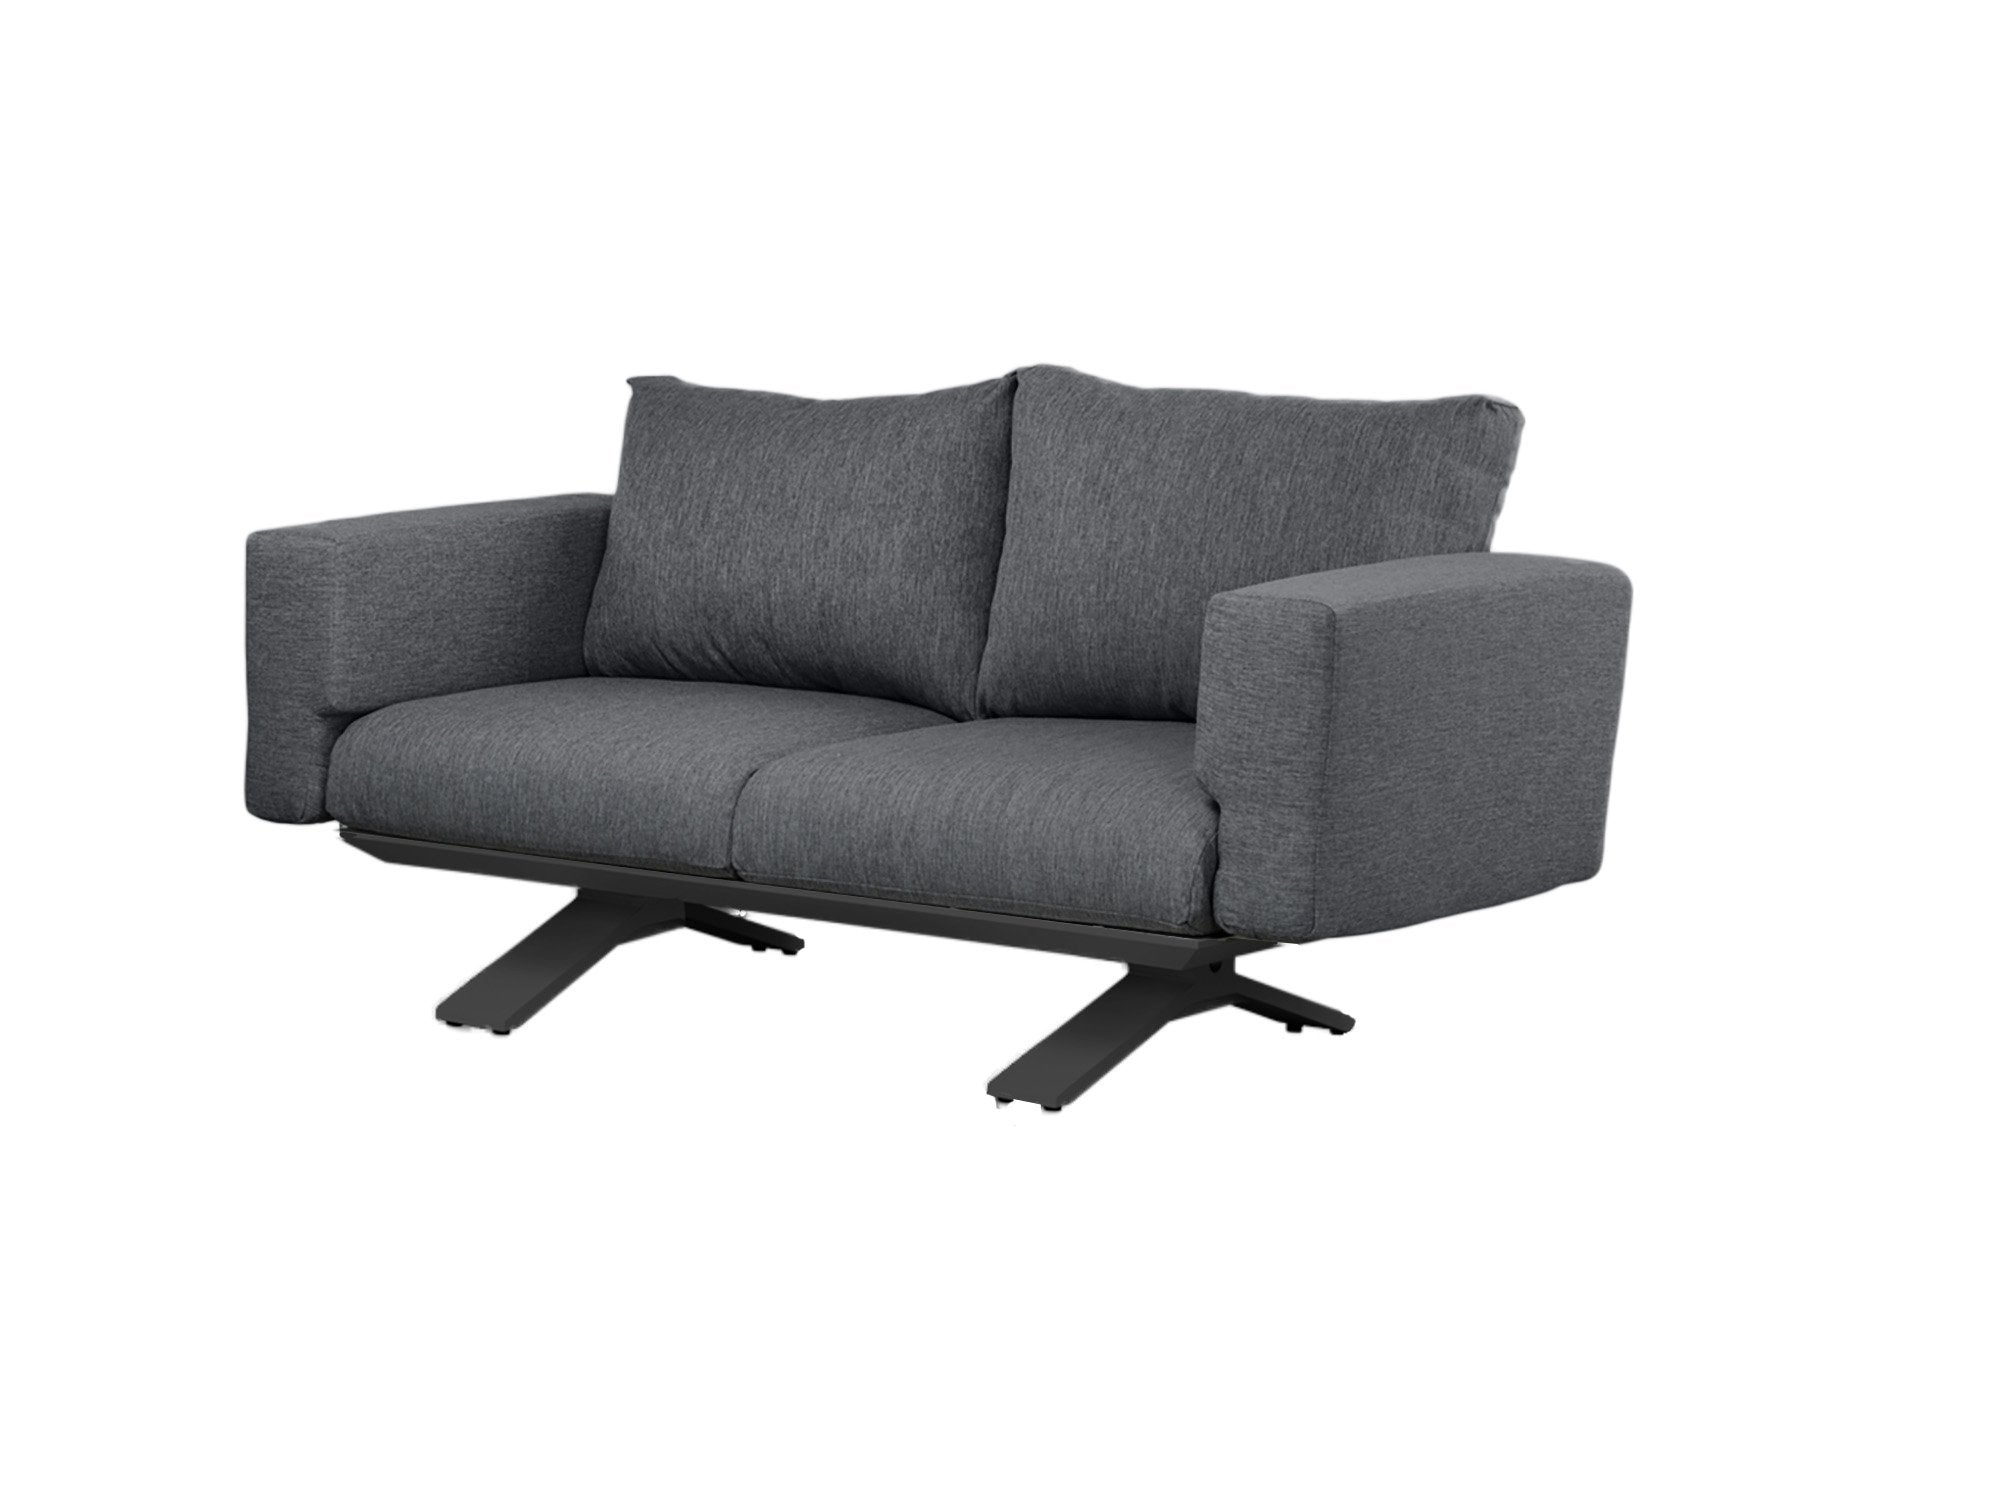 Stockholm Outdoor 2-Seater Sofa